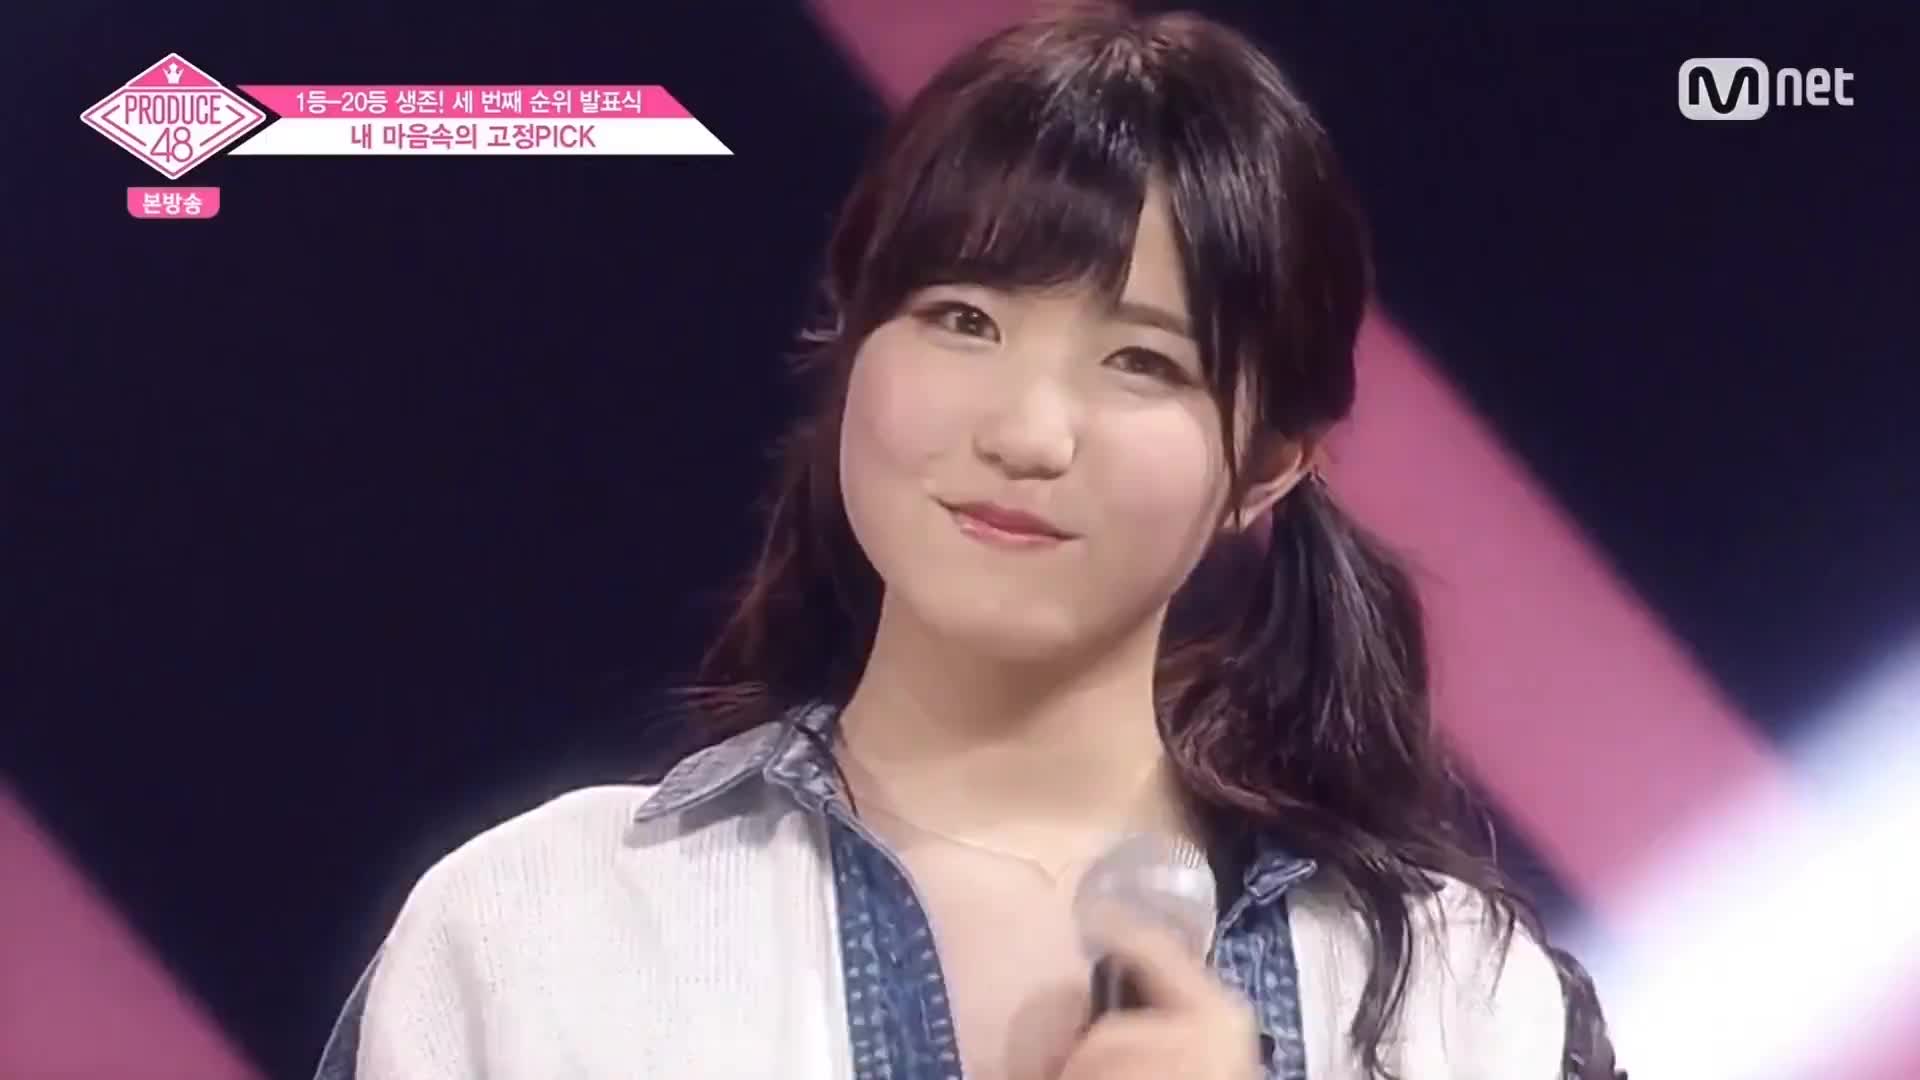 AKB48 IZ*ONE Hitomi. Wave GIF by KPopGG. Find